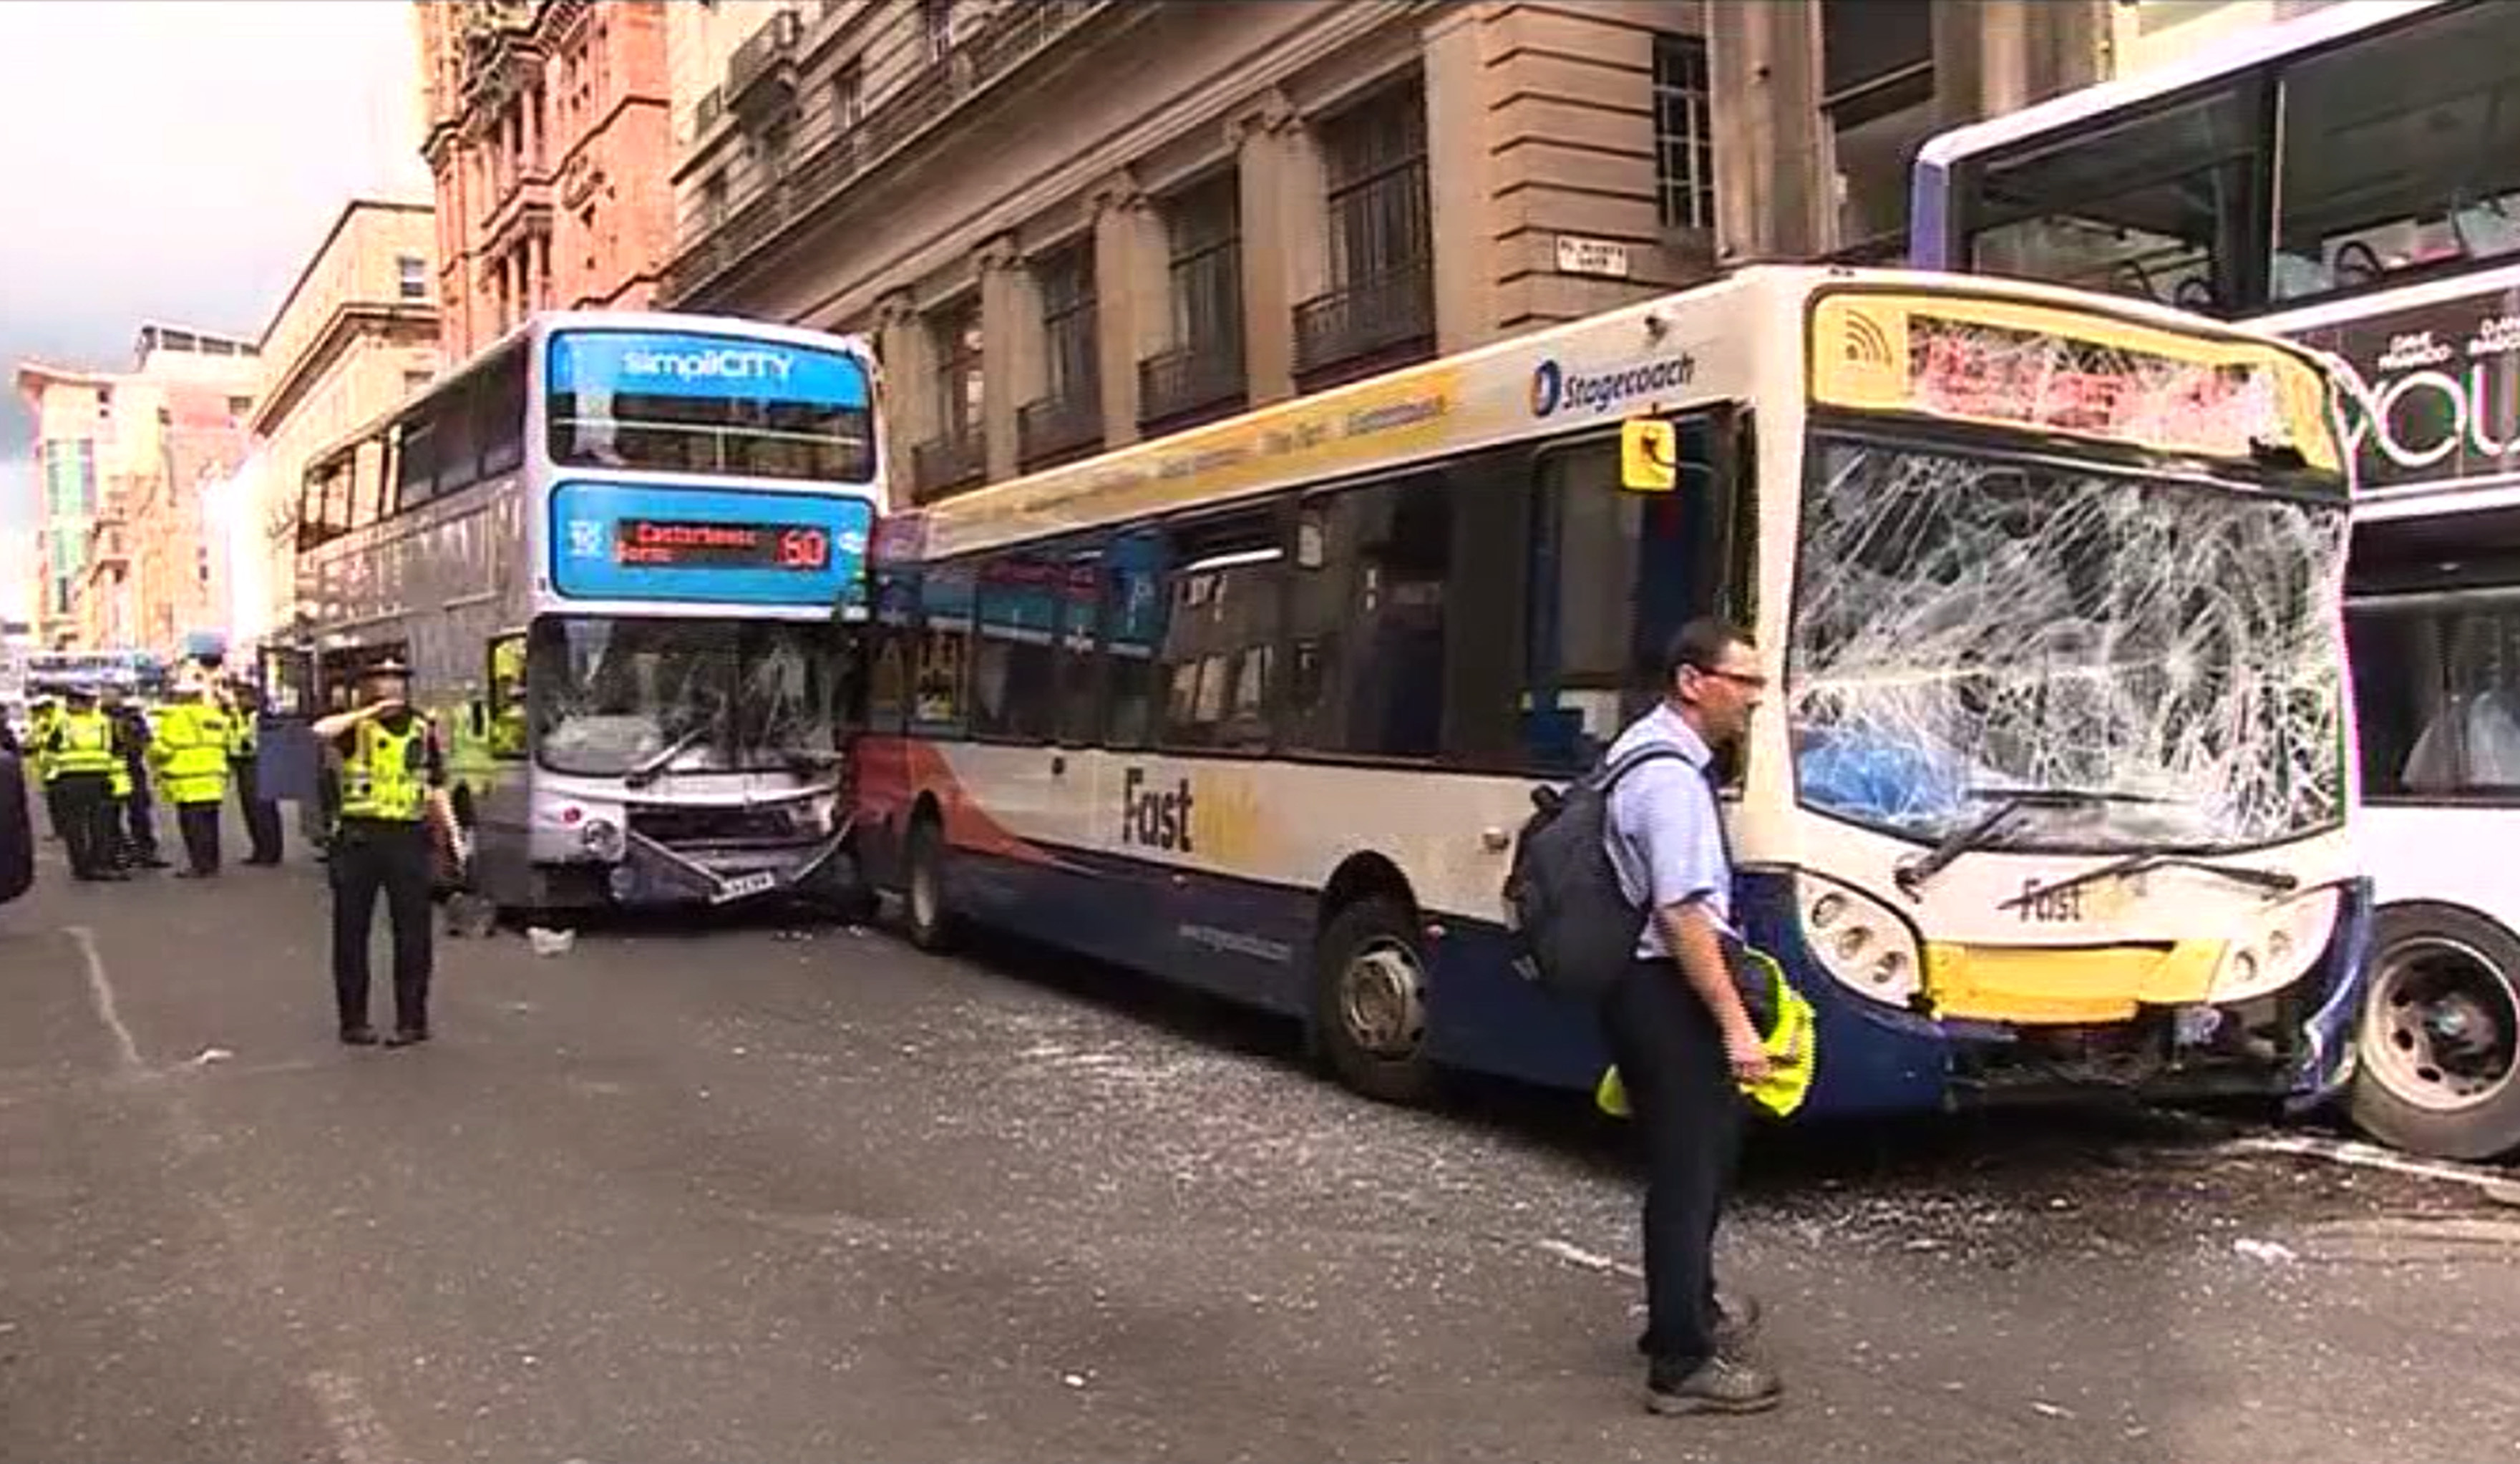 Male pedestrian hit by 'runaway' bus in Glasgow city centre (Universal News And Sport)